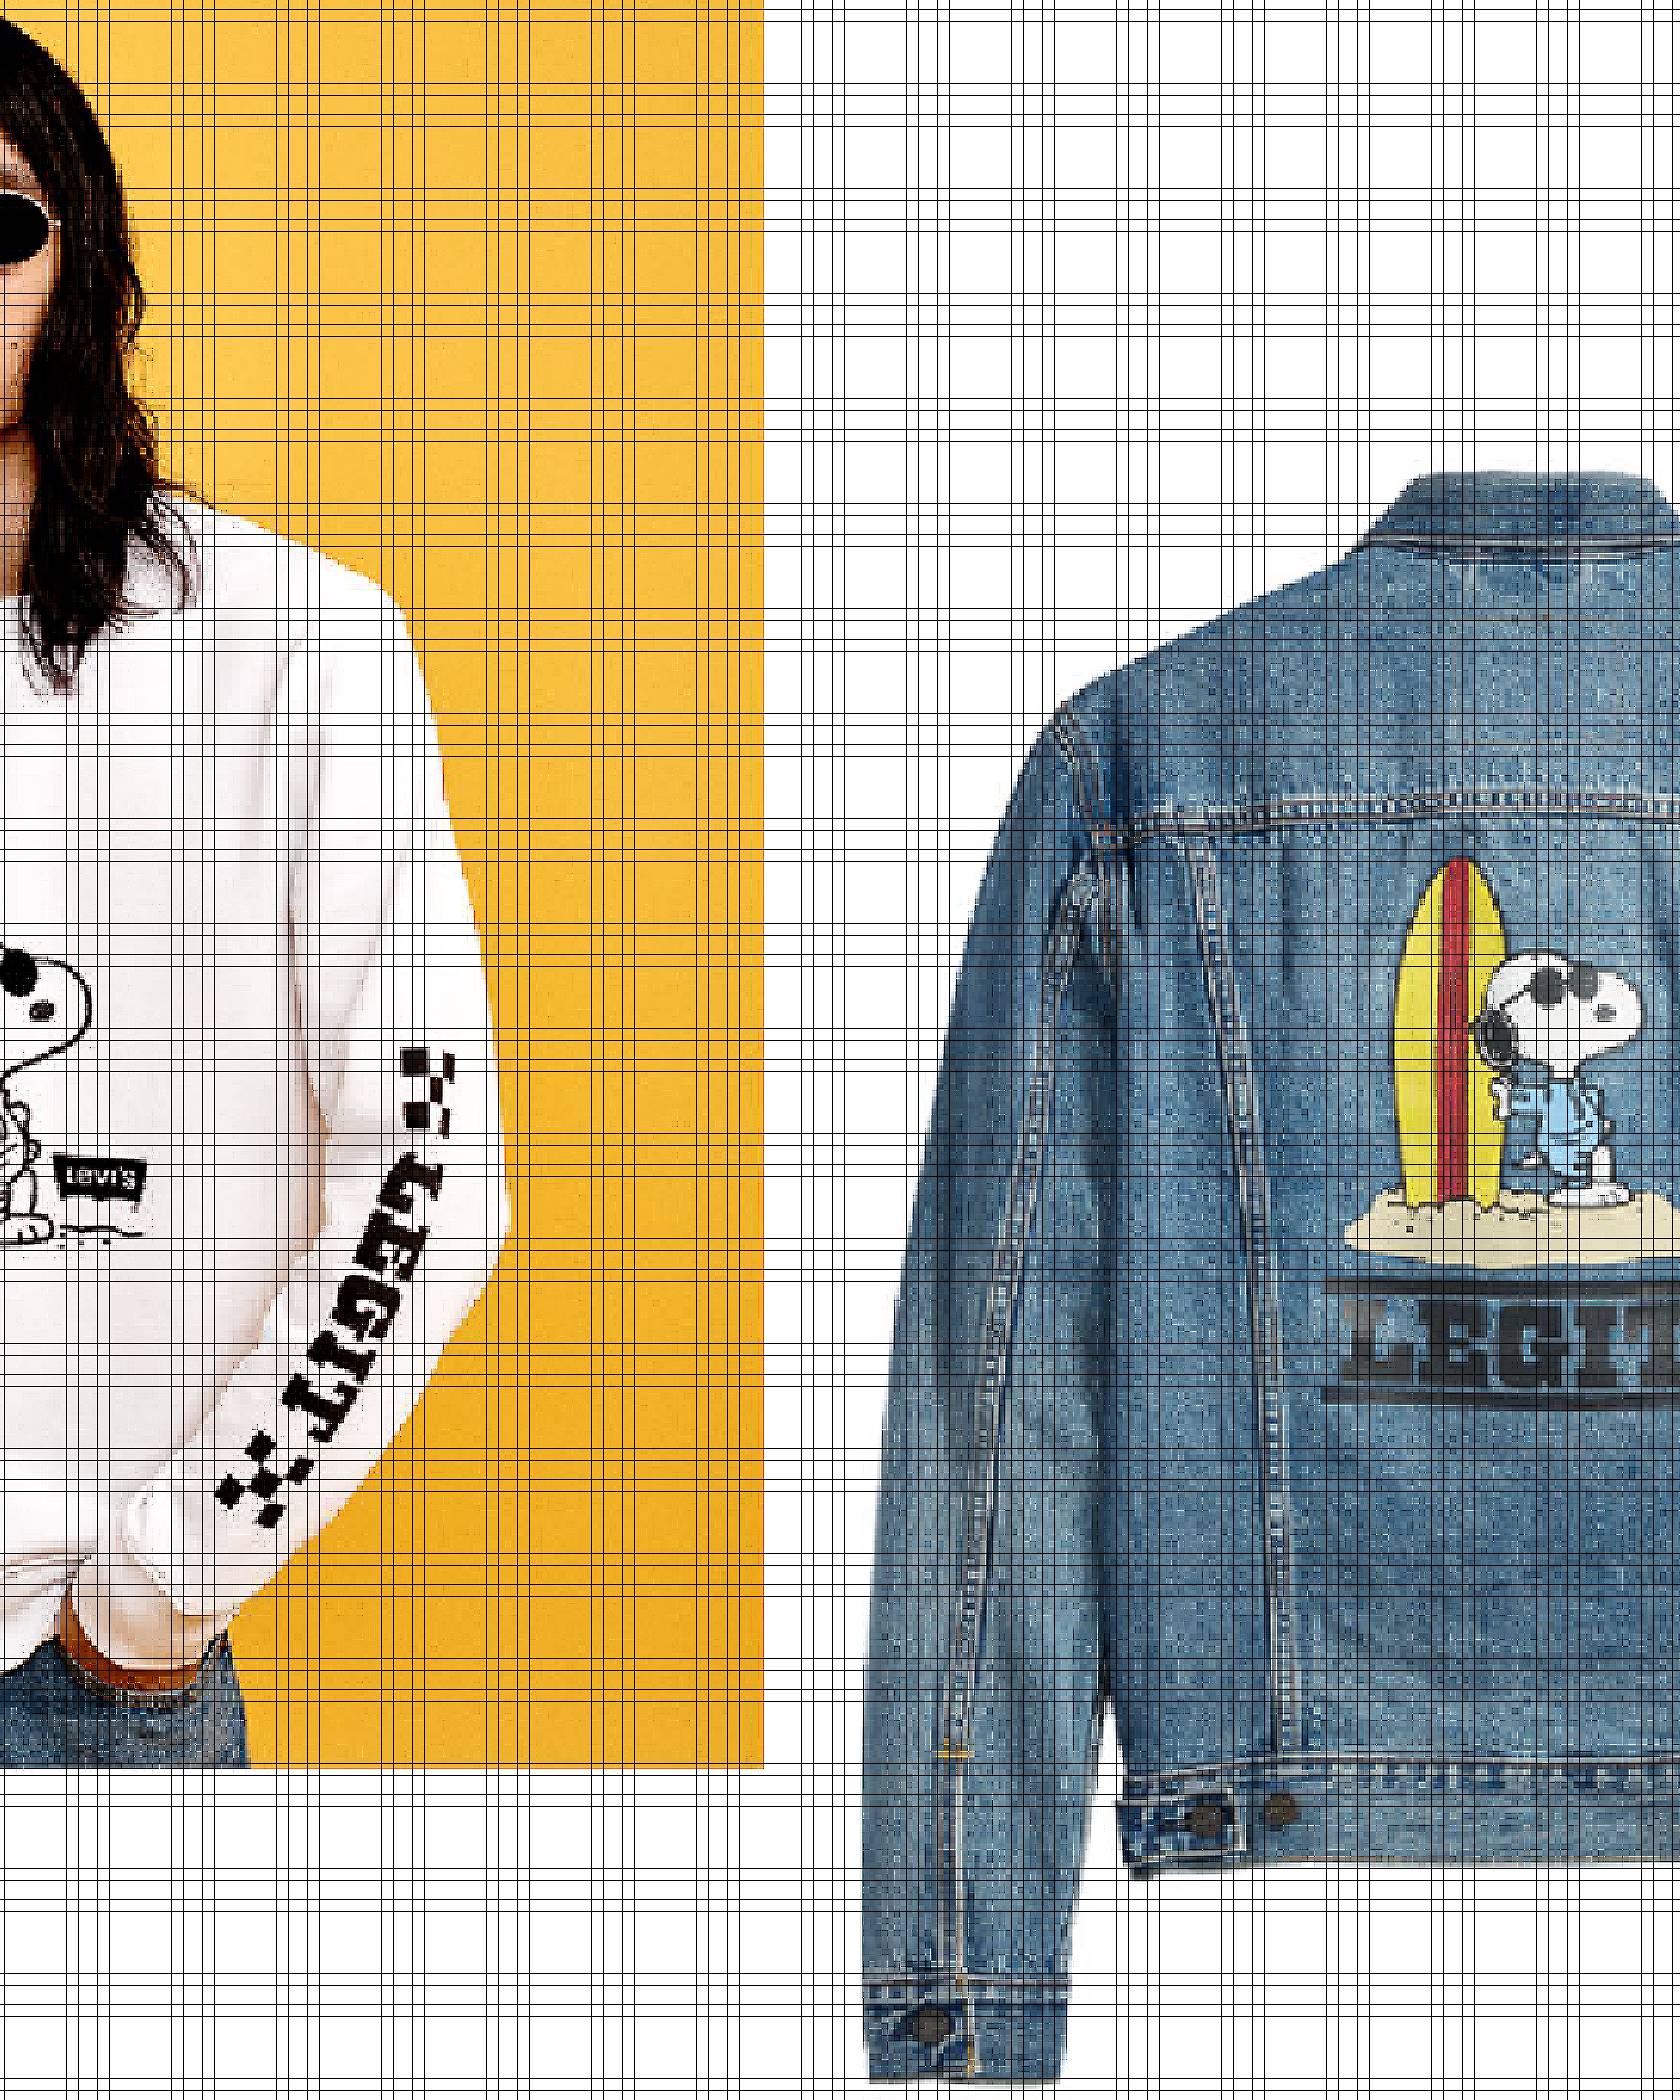 Single up image with the left a yellow background and right a white background with a peanuts denim jacket.